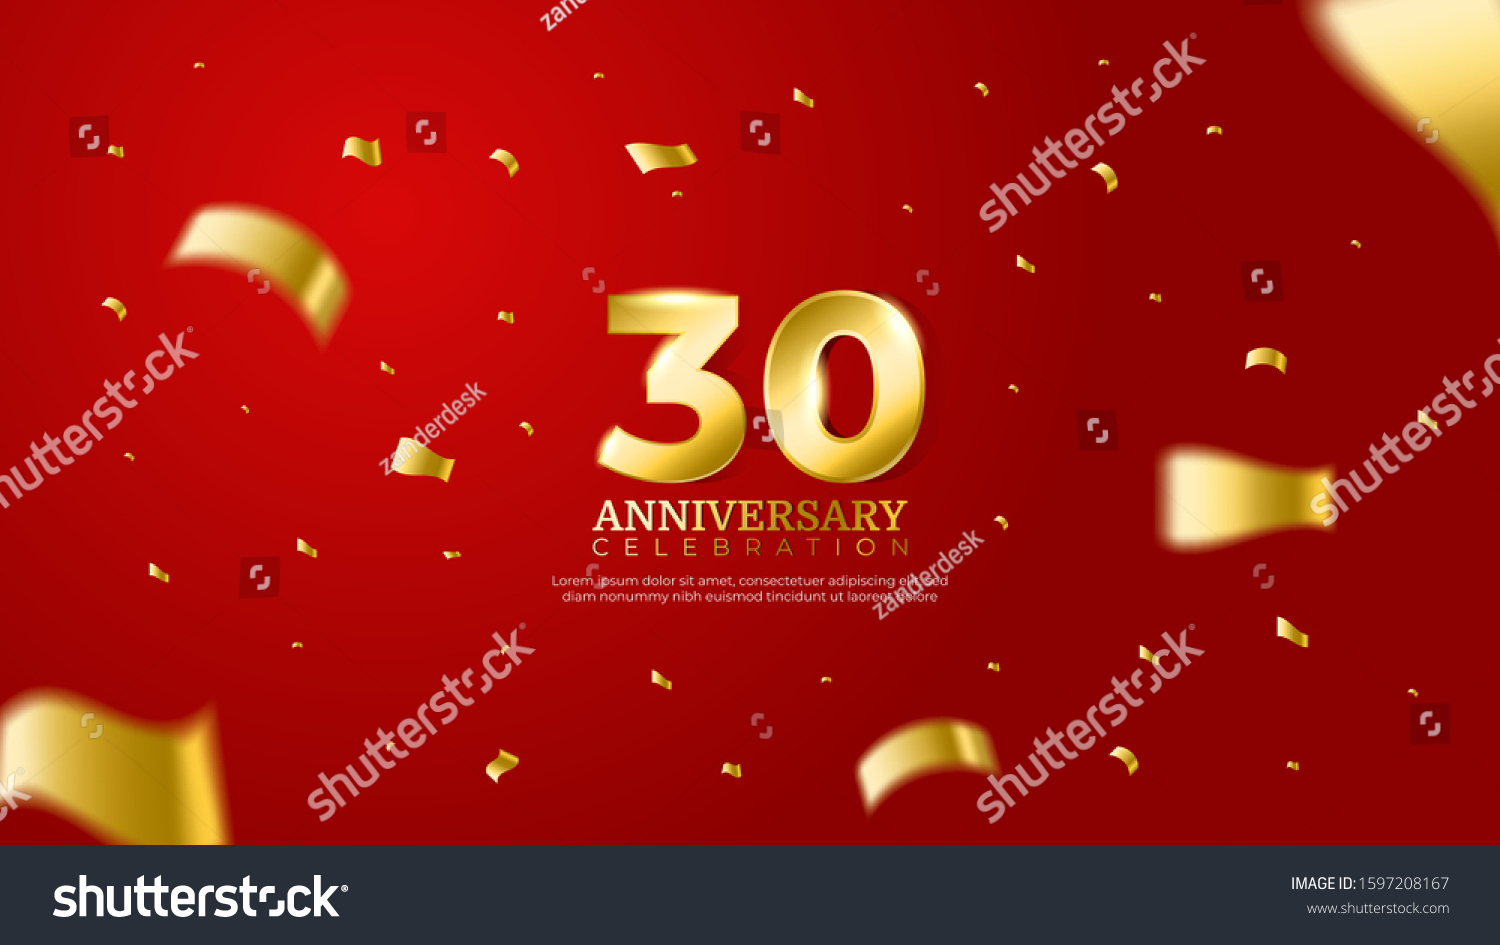 30th Anniversary Celebration Vector Red Background Stock Vector ...